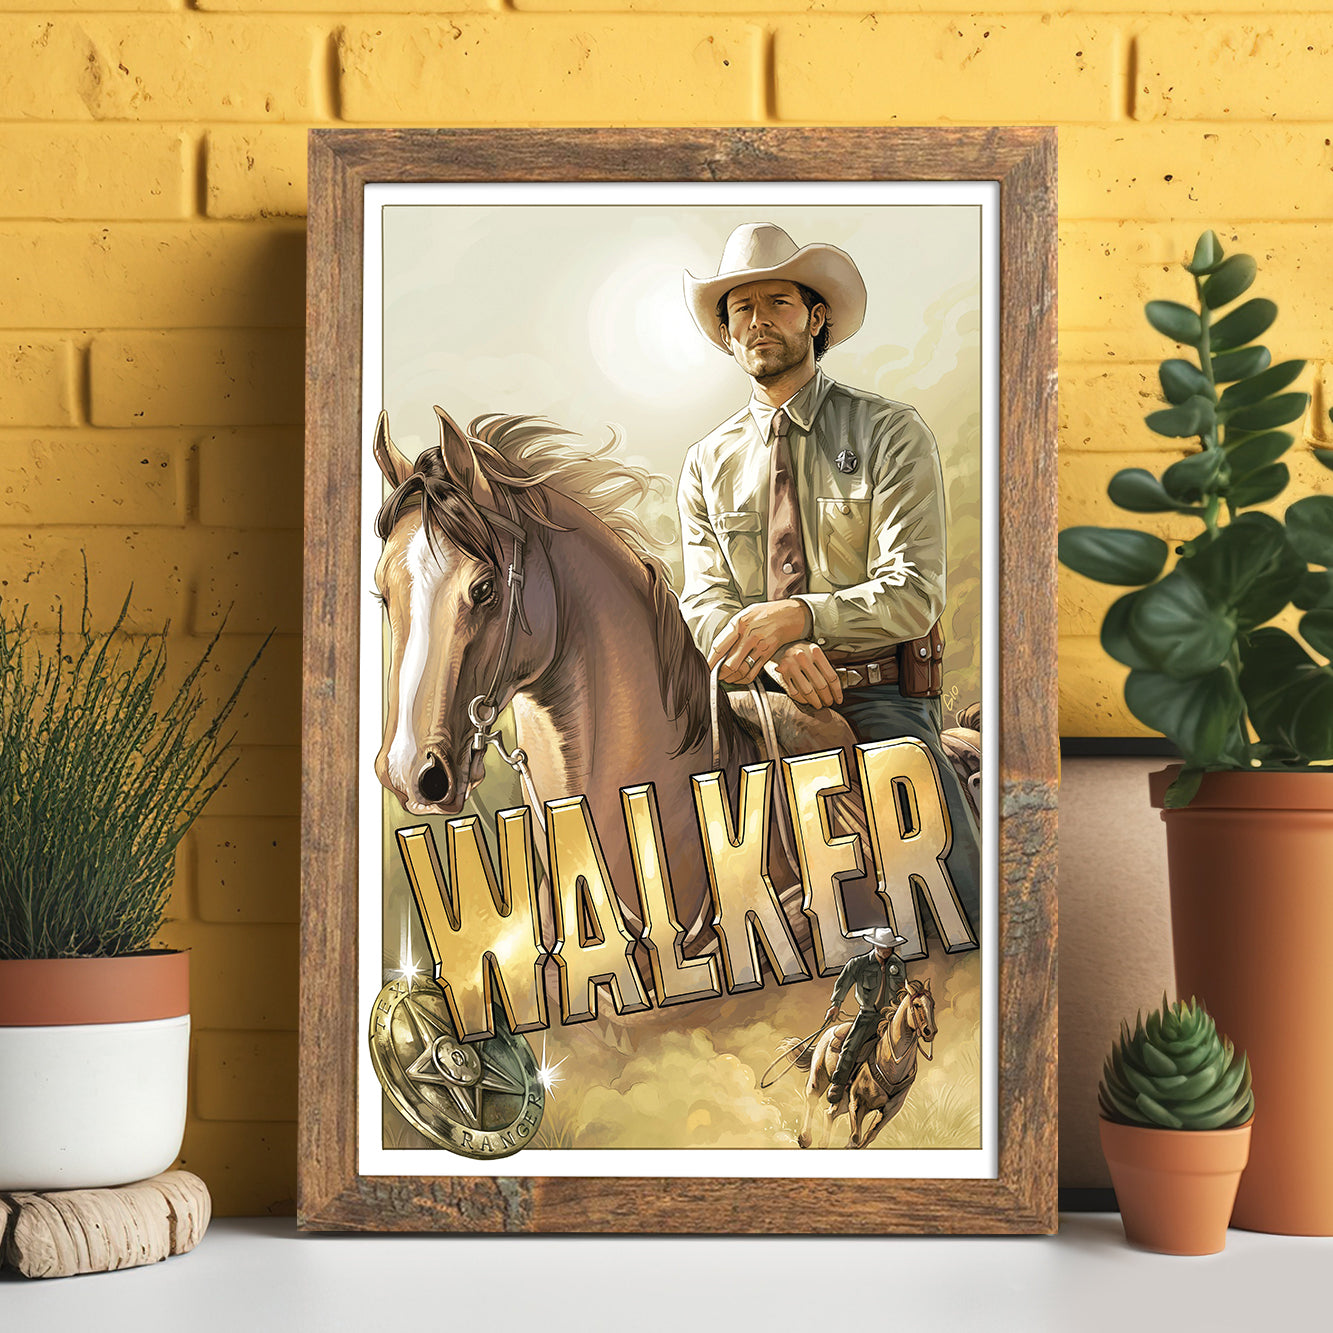 A framed drawing of the character Walker, portrayed by actor Jared Padalecki, on horseback. Under the horse is gold text saying "walker," with a sheriff's badge next to it. Behind the drawing is a yellow wall, and potted cacti are on either side.